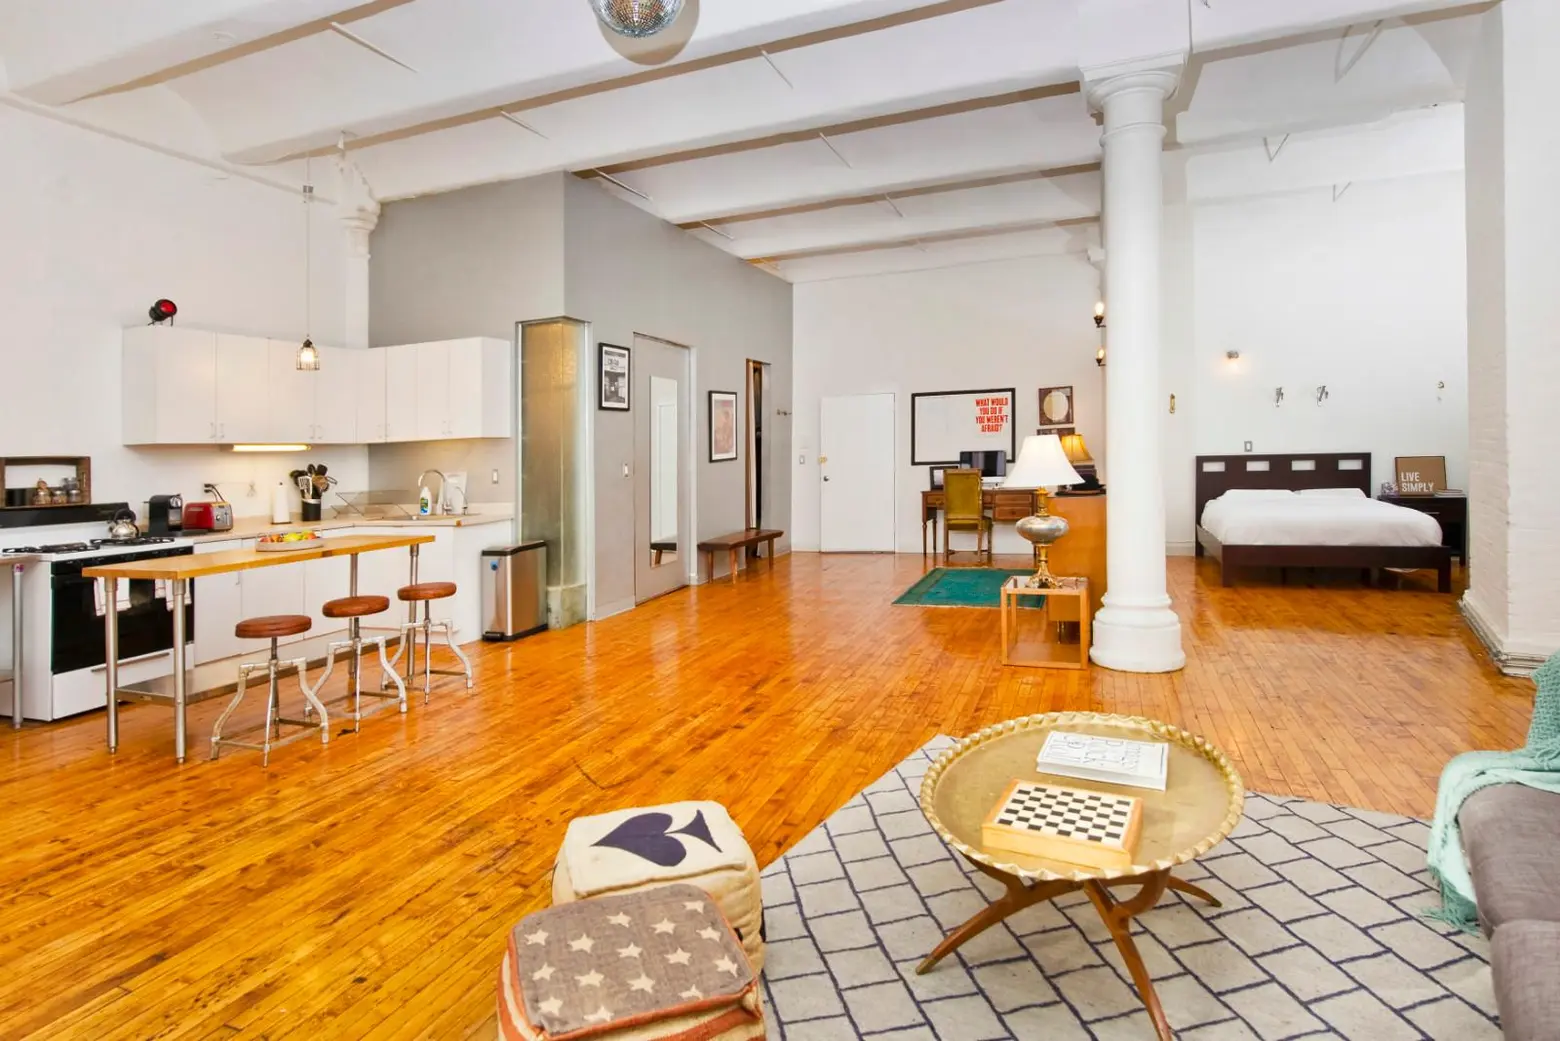 All You Need to Bring to This Curated Noho Loft Is a Toothbrush and $6,500 a Month